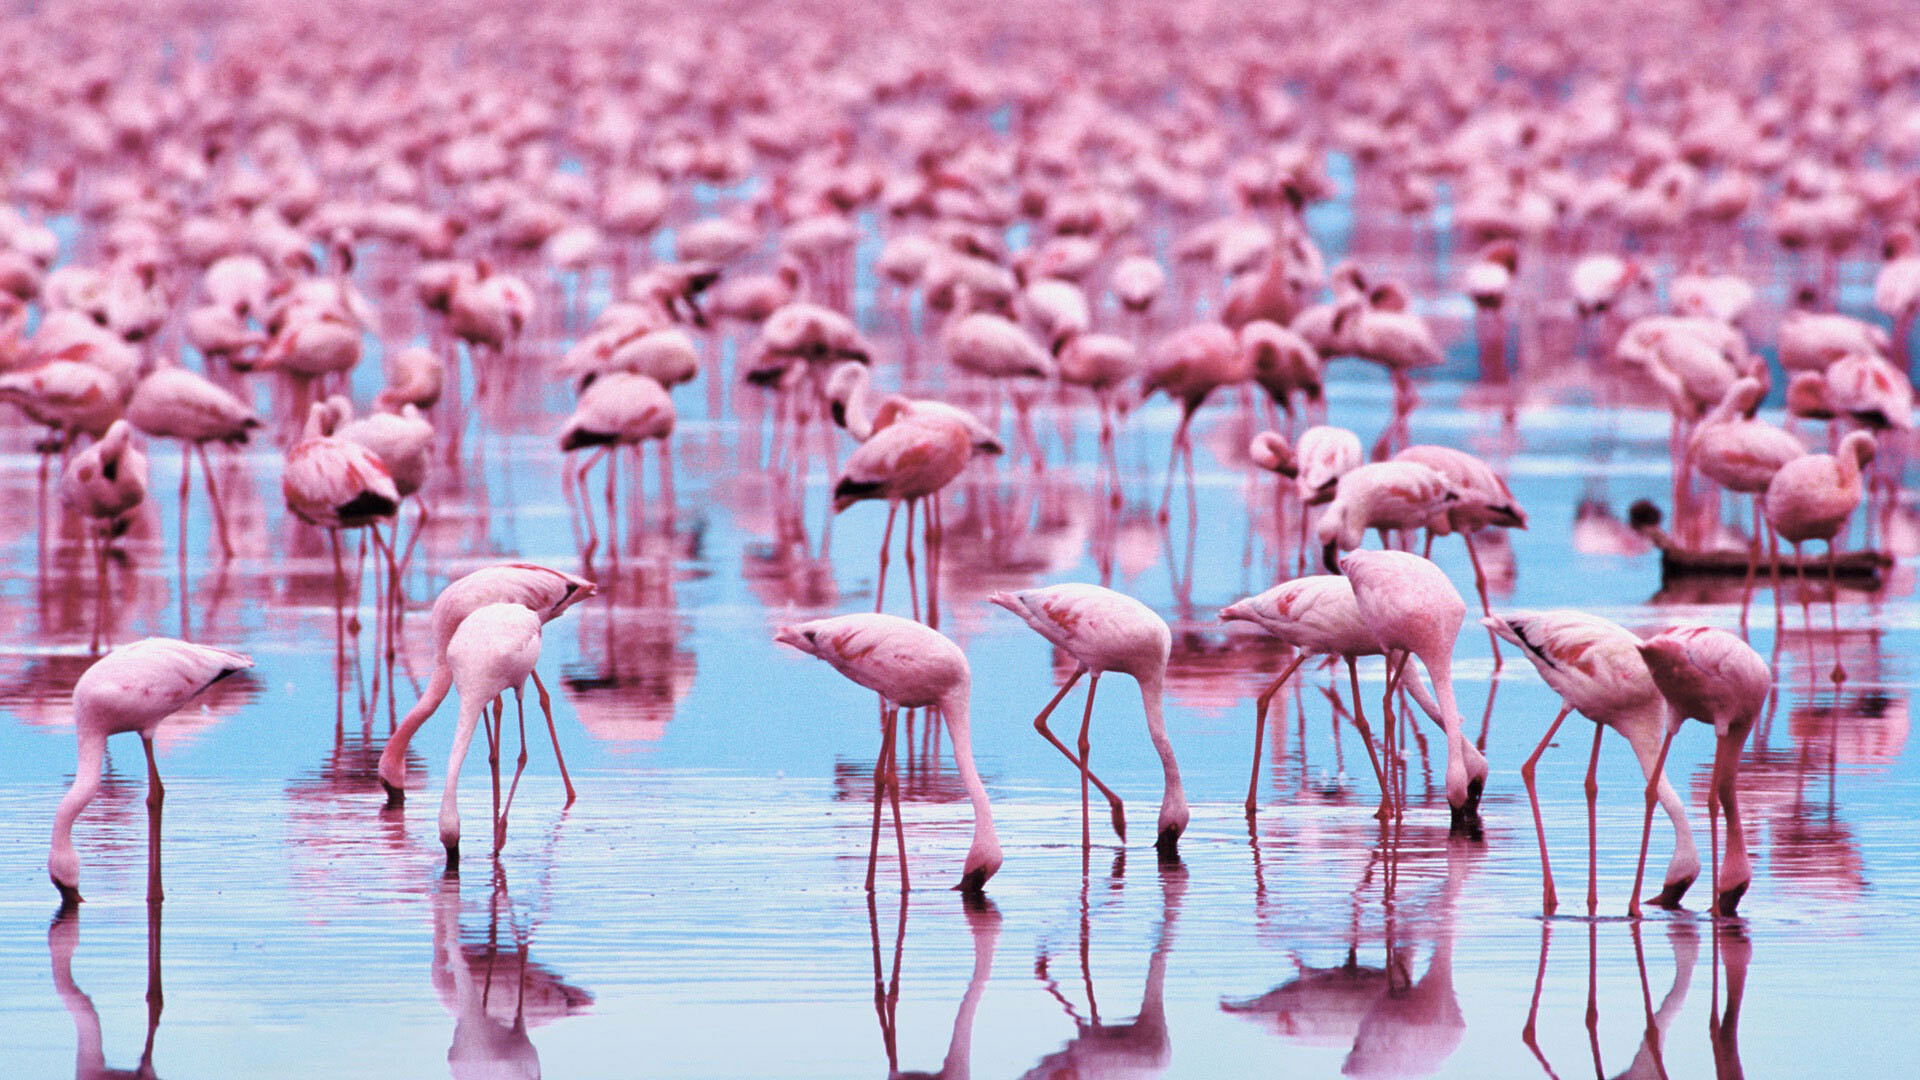 Flamingo: Social birds, Live in colonies whose population can number in the thousands. 1920x1080 Full HD Background.